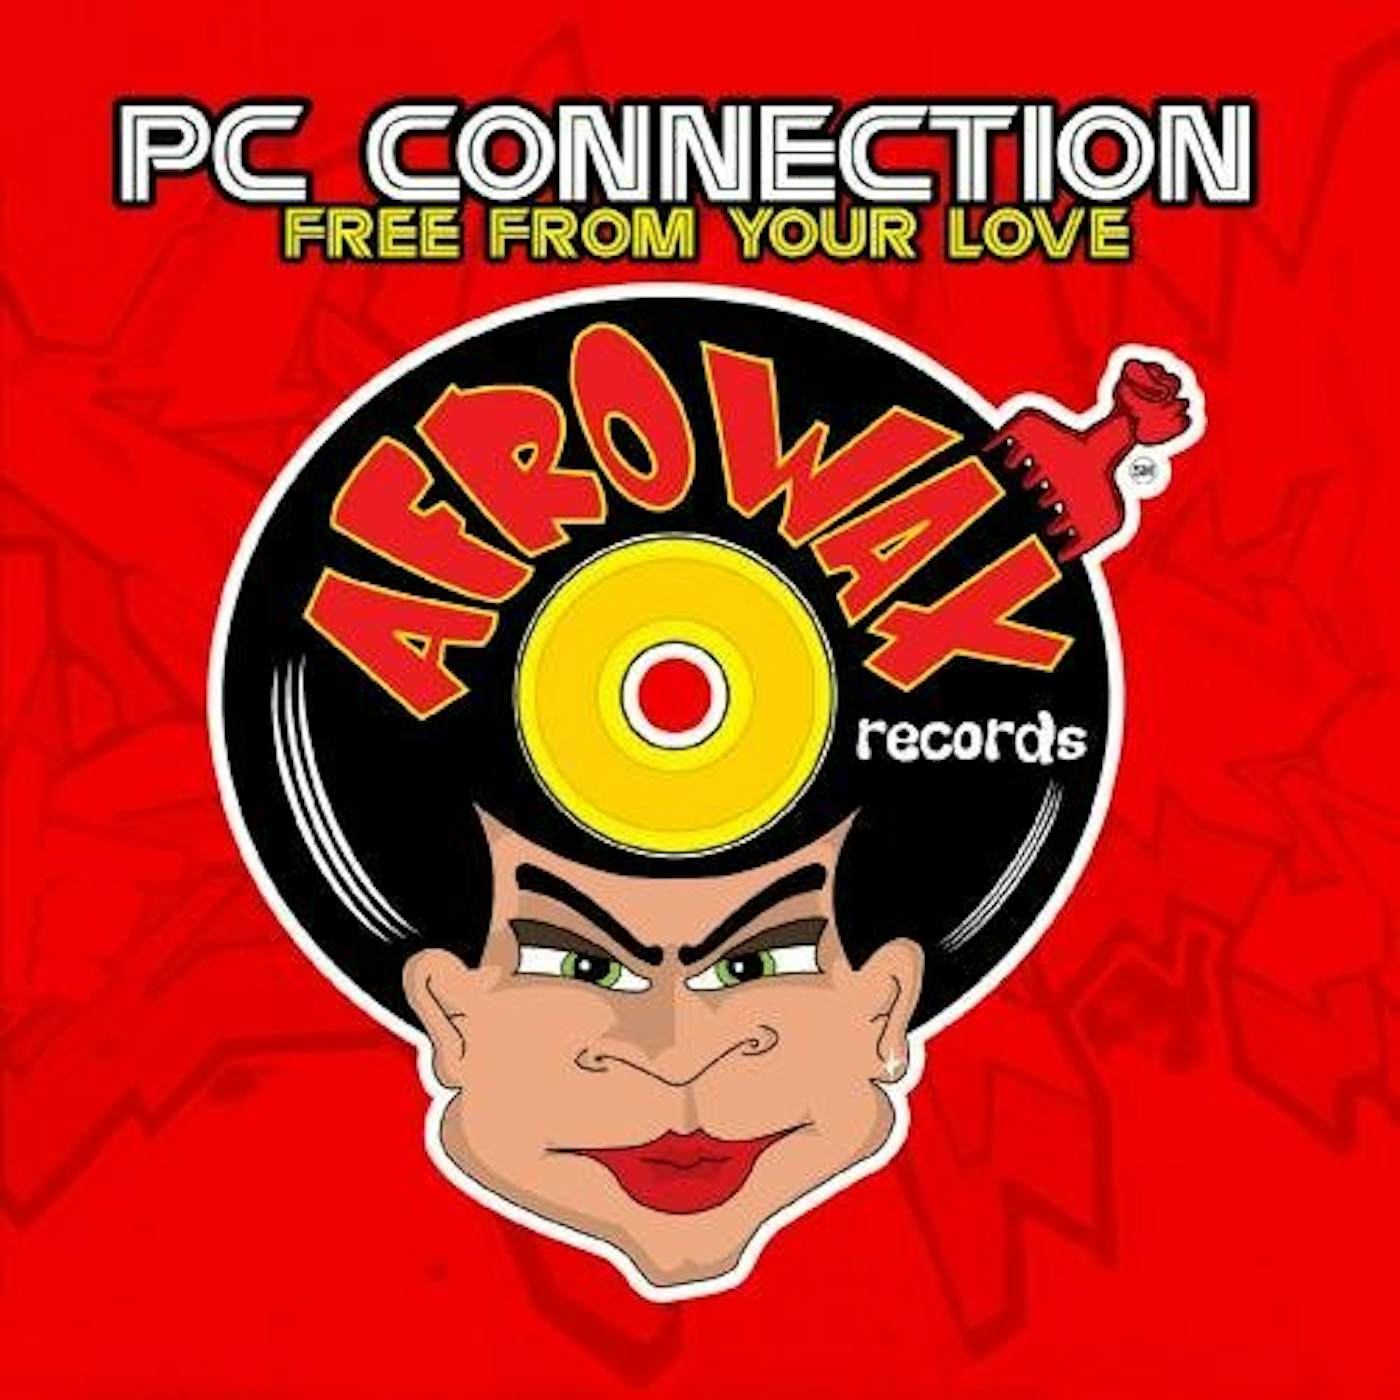 PC Connection FREE FROM YOUR LOVE CD